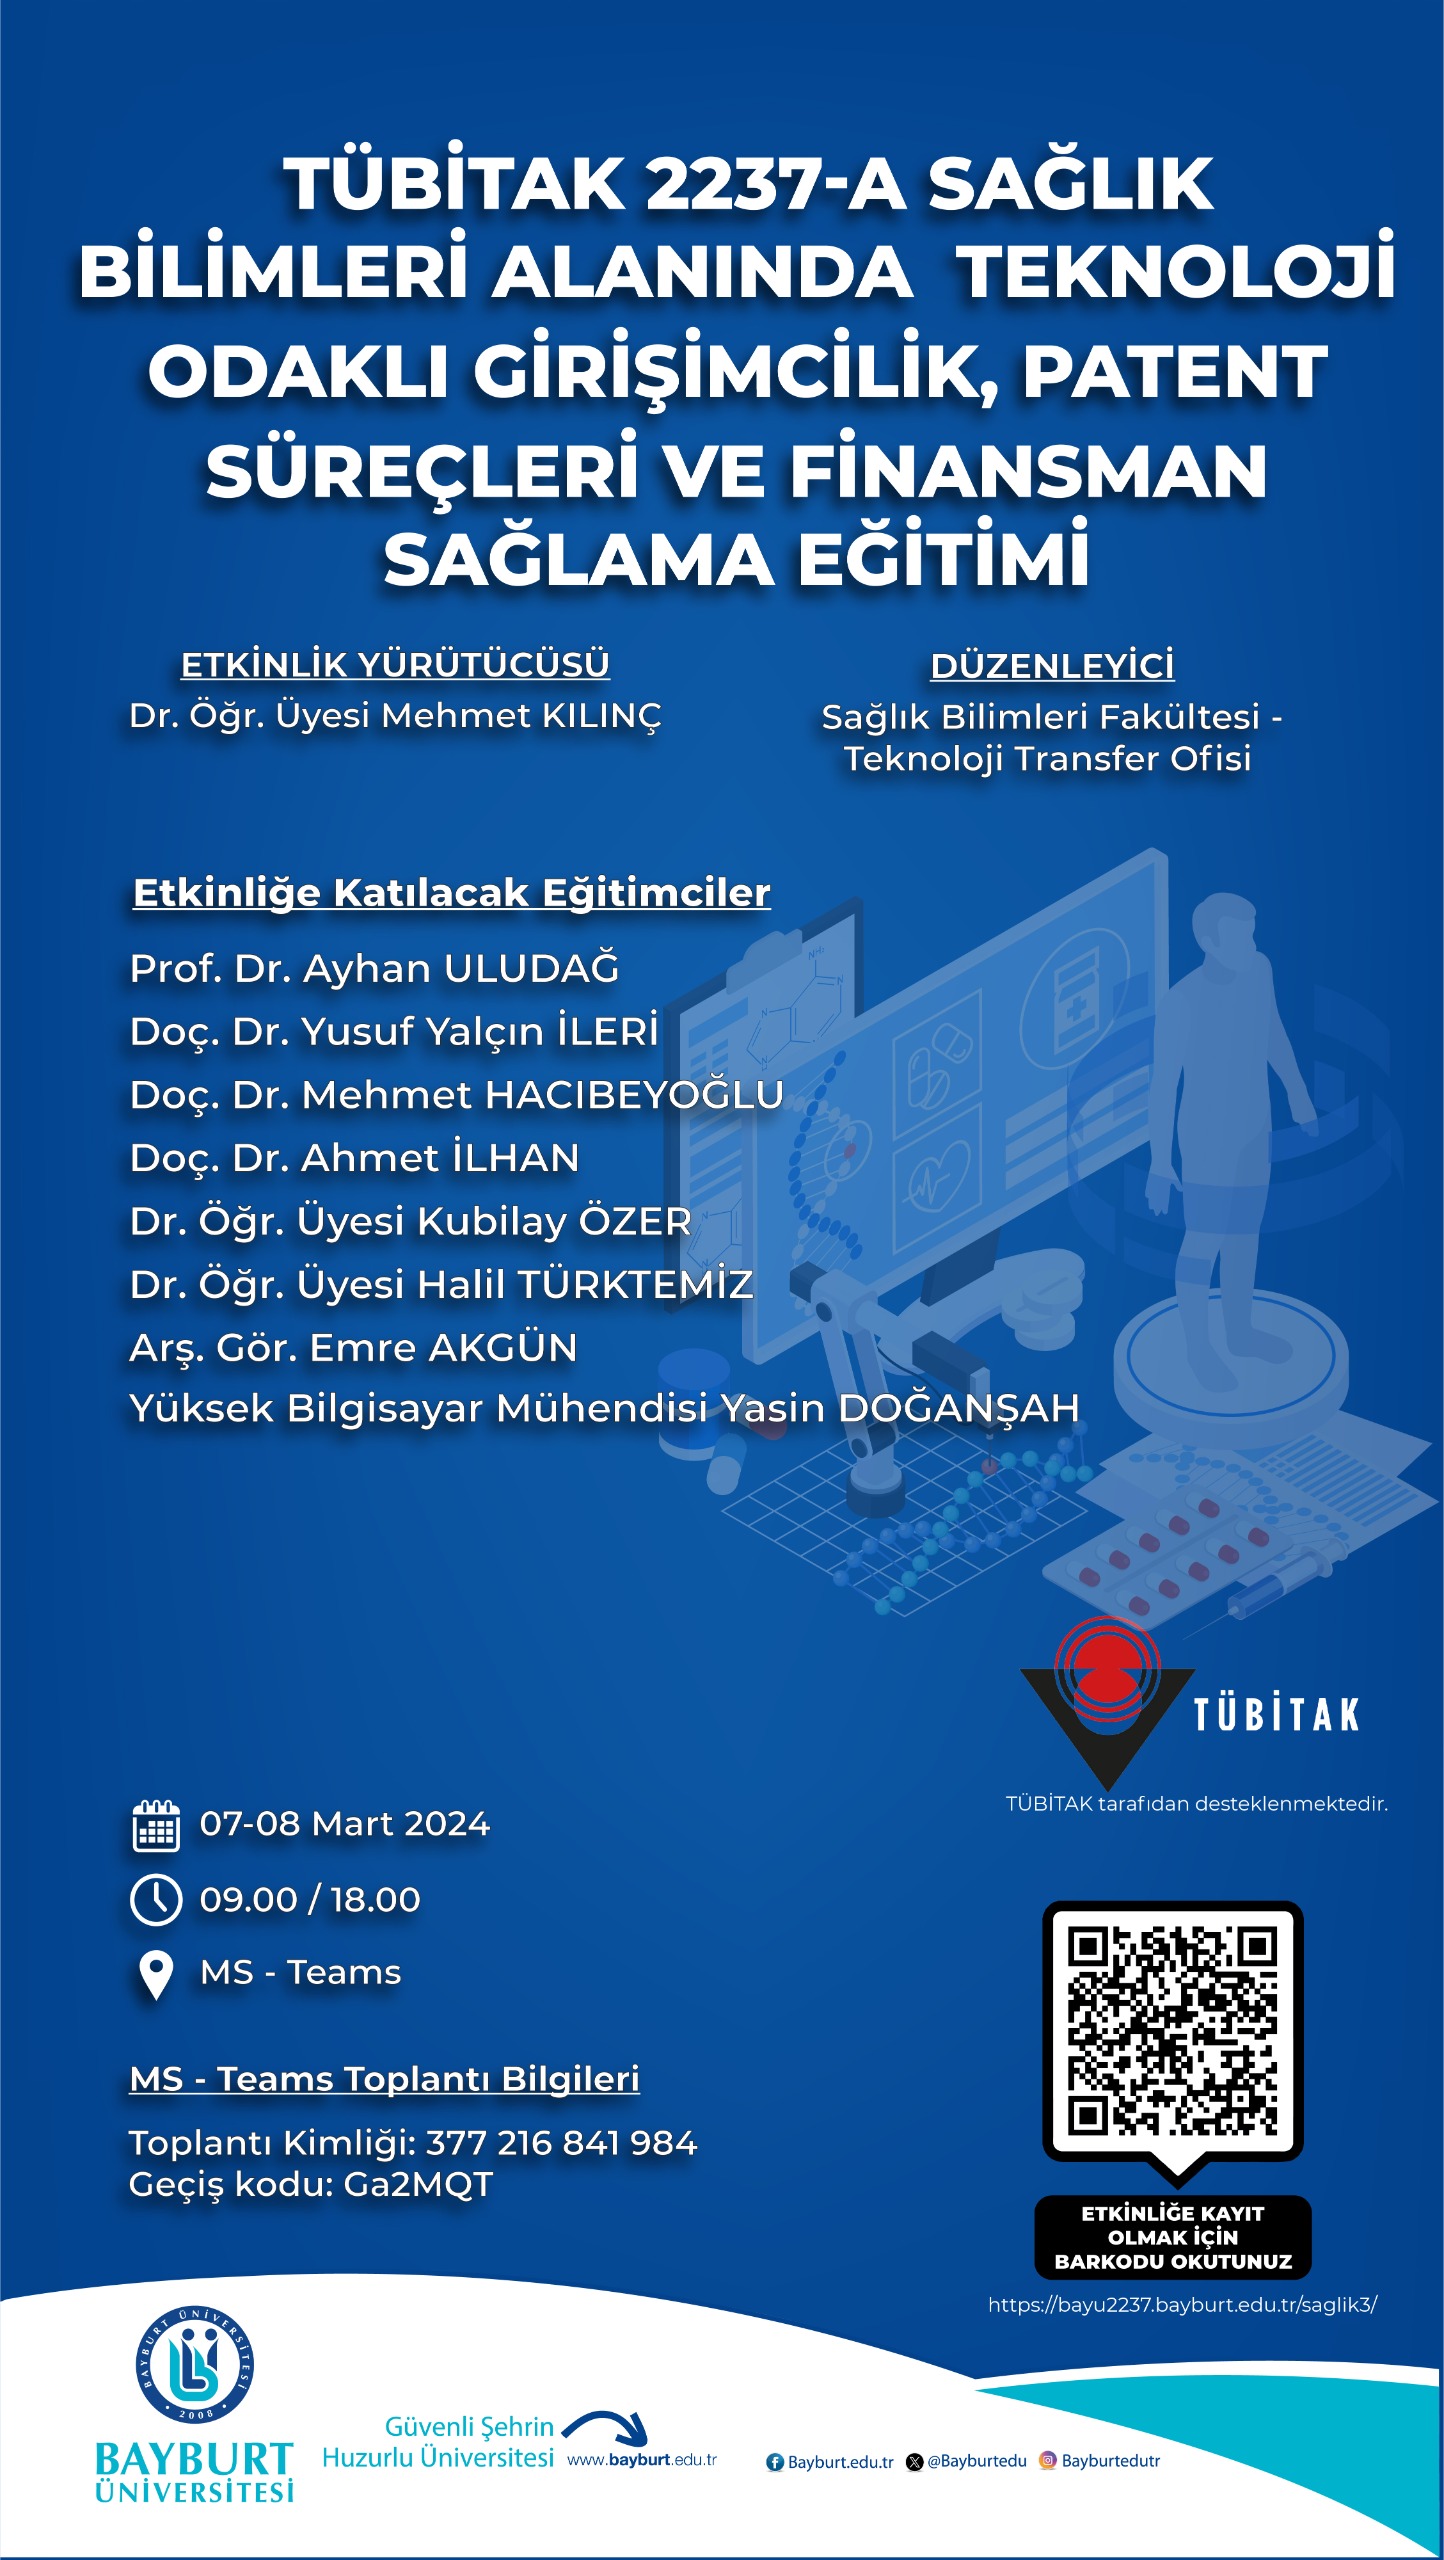 Tübitak 2237-a Technology-focused Entrepreneurship, Patent Processes and Financing Training in the Field of Health Sciences